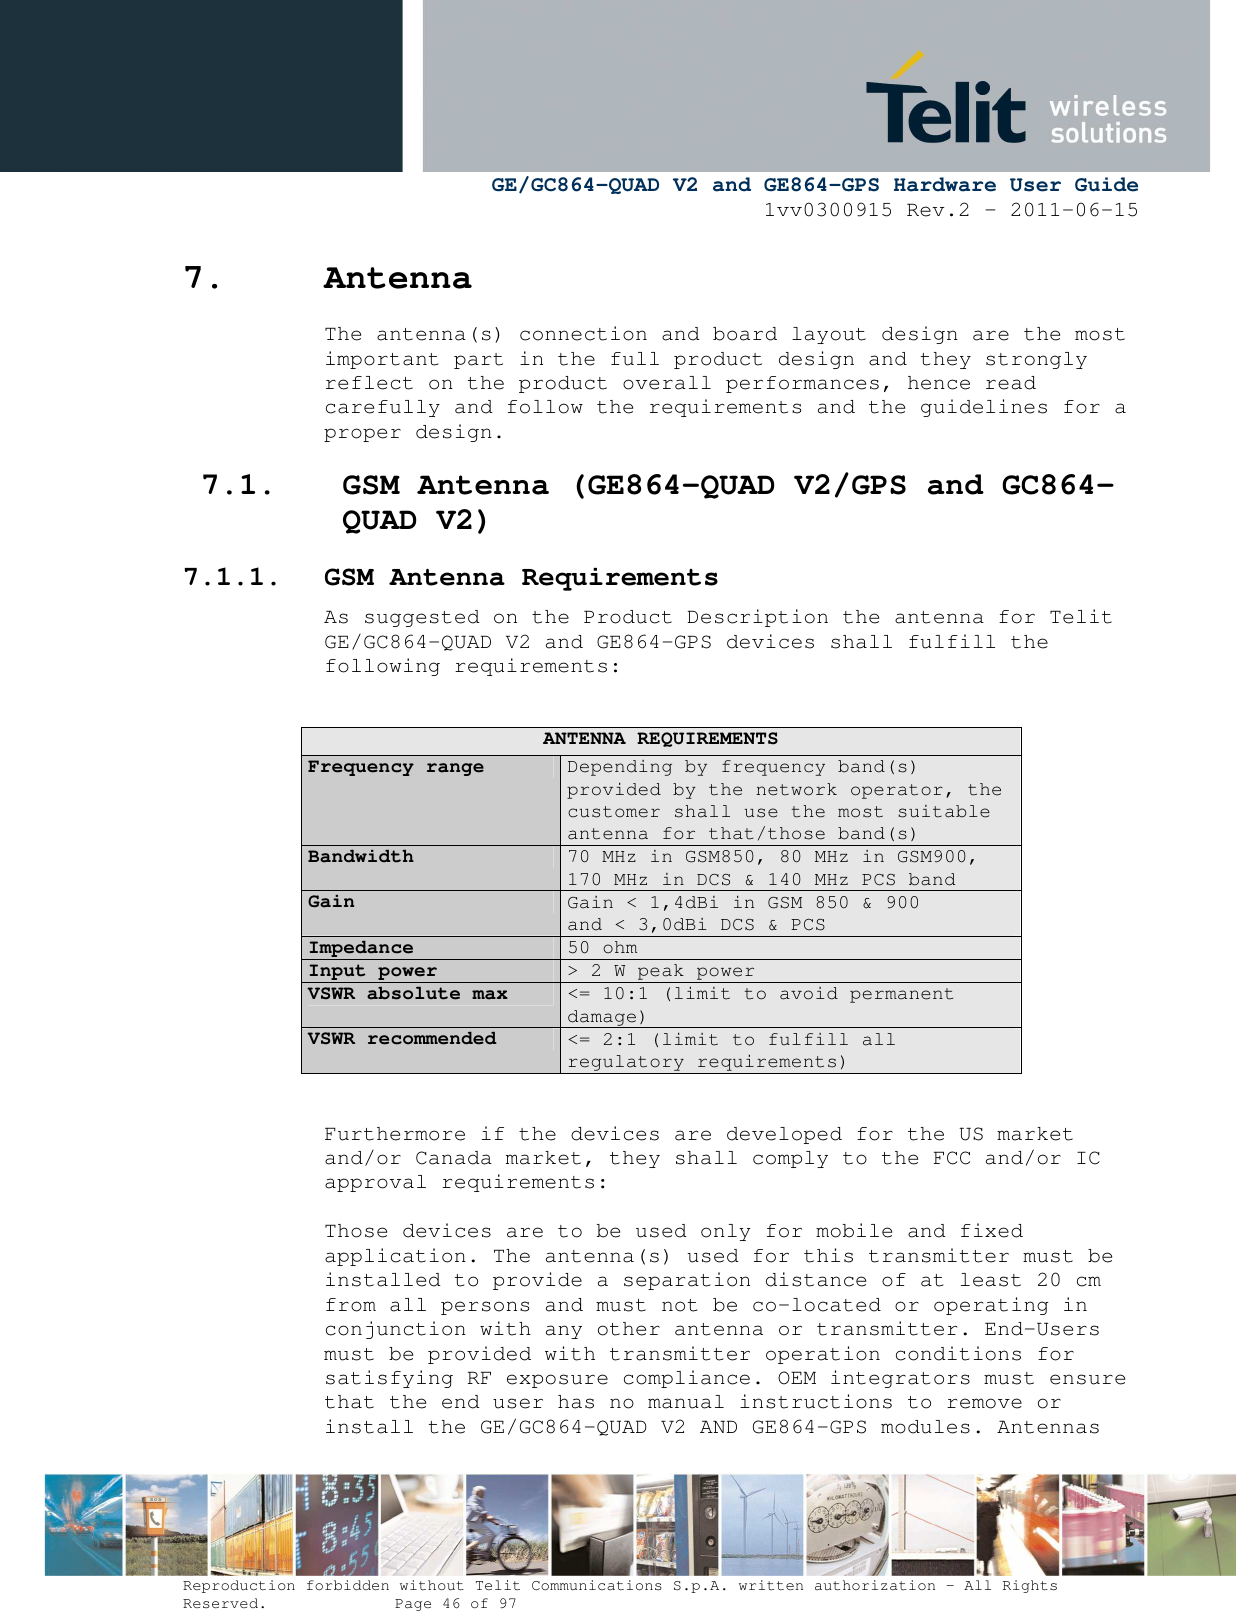      GE/GC864-QUAD V2 and GE864-GPS Hardware User Guide 1vv0300915 Rev.2 – 2011-06-15  Reproduction forbidden without Telit Communications S.p.A. written authorization - All Rights Reserved.    Page 46 of 97  7. Antenna The antenna(s) connection and board layout design are the most important part in the full product design and they strongly reflect on the product overall performances, hence read carefully and follow the requirements and the guidelines for a proper design. 7.1. GSM Antenna (GE864-QUAD V2/GPS and GC864-QUAD V2) 7.1.1. GSM Antenna Requirements As suggested on the Product Description the antenna for Telit GE/GC864-QUAD V2 and GE864-GPS devices shall fulfill the following requirements:  ANTENNA REQUIREMENTS Frequency range  Depending by frequency band(s) provided by the network operator, the customer shall use the most suitable antenna for that/those band(s) Bandwidth  70 MHz in GSM850, 80 MHz in GSM900, 170 MHz in DCS &amp; 140 MHz PCS band Gain  Gain &lt; 1,4dBi in GSM 850 &amp; 900  and &lt; 3,0dBi DCS &amp; PCS Impedance  50 ohm Input power  &gt; 2 W peak power VSWR absolute max  &lt;= 10:1 (limit to avoid permanent damage) VSWR recommended  &lt;= 2:1 (limit to fulfill all regulatory requirements)  Furthermore if the devices are developed for the US market and/or Canada market, they shall comply to the FCC and/or IC approval requirements:  Those devices are to be used only for mobile and fixed application. The antenna(s) used for this transmitter must be installed to provide a separation distance of at least 20 cm from all persons and must not be co-located or operating in conjunction with any other antenna or transmitter. End-Users must be provided with transmitter operation conditions for satisfying RF exposure compliance. OEM integrators must ensure that the end user has no manual instructions to remove or install the GE/GC864-QUAD V2 AND GE864-GPS modules. Antennas 